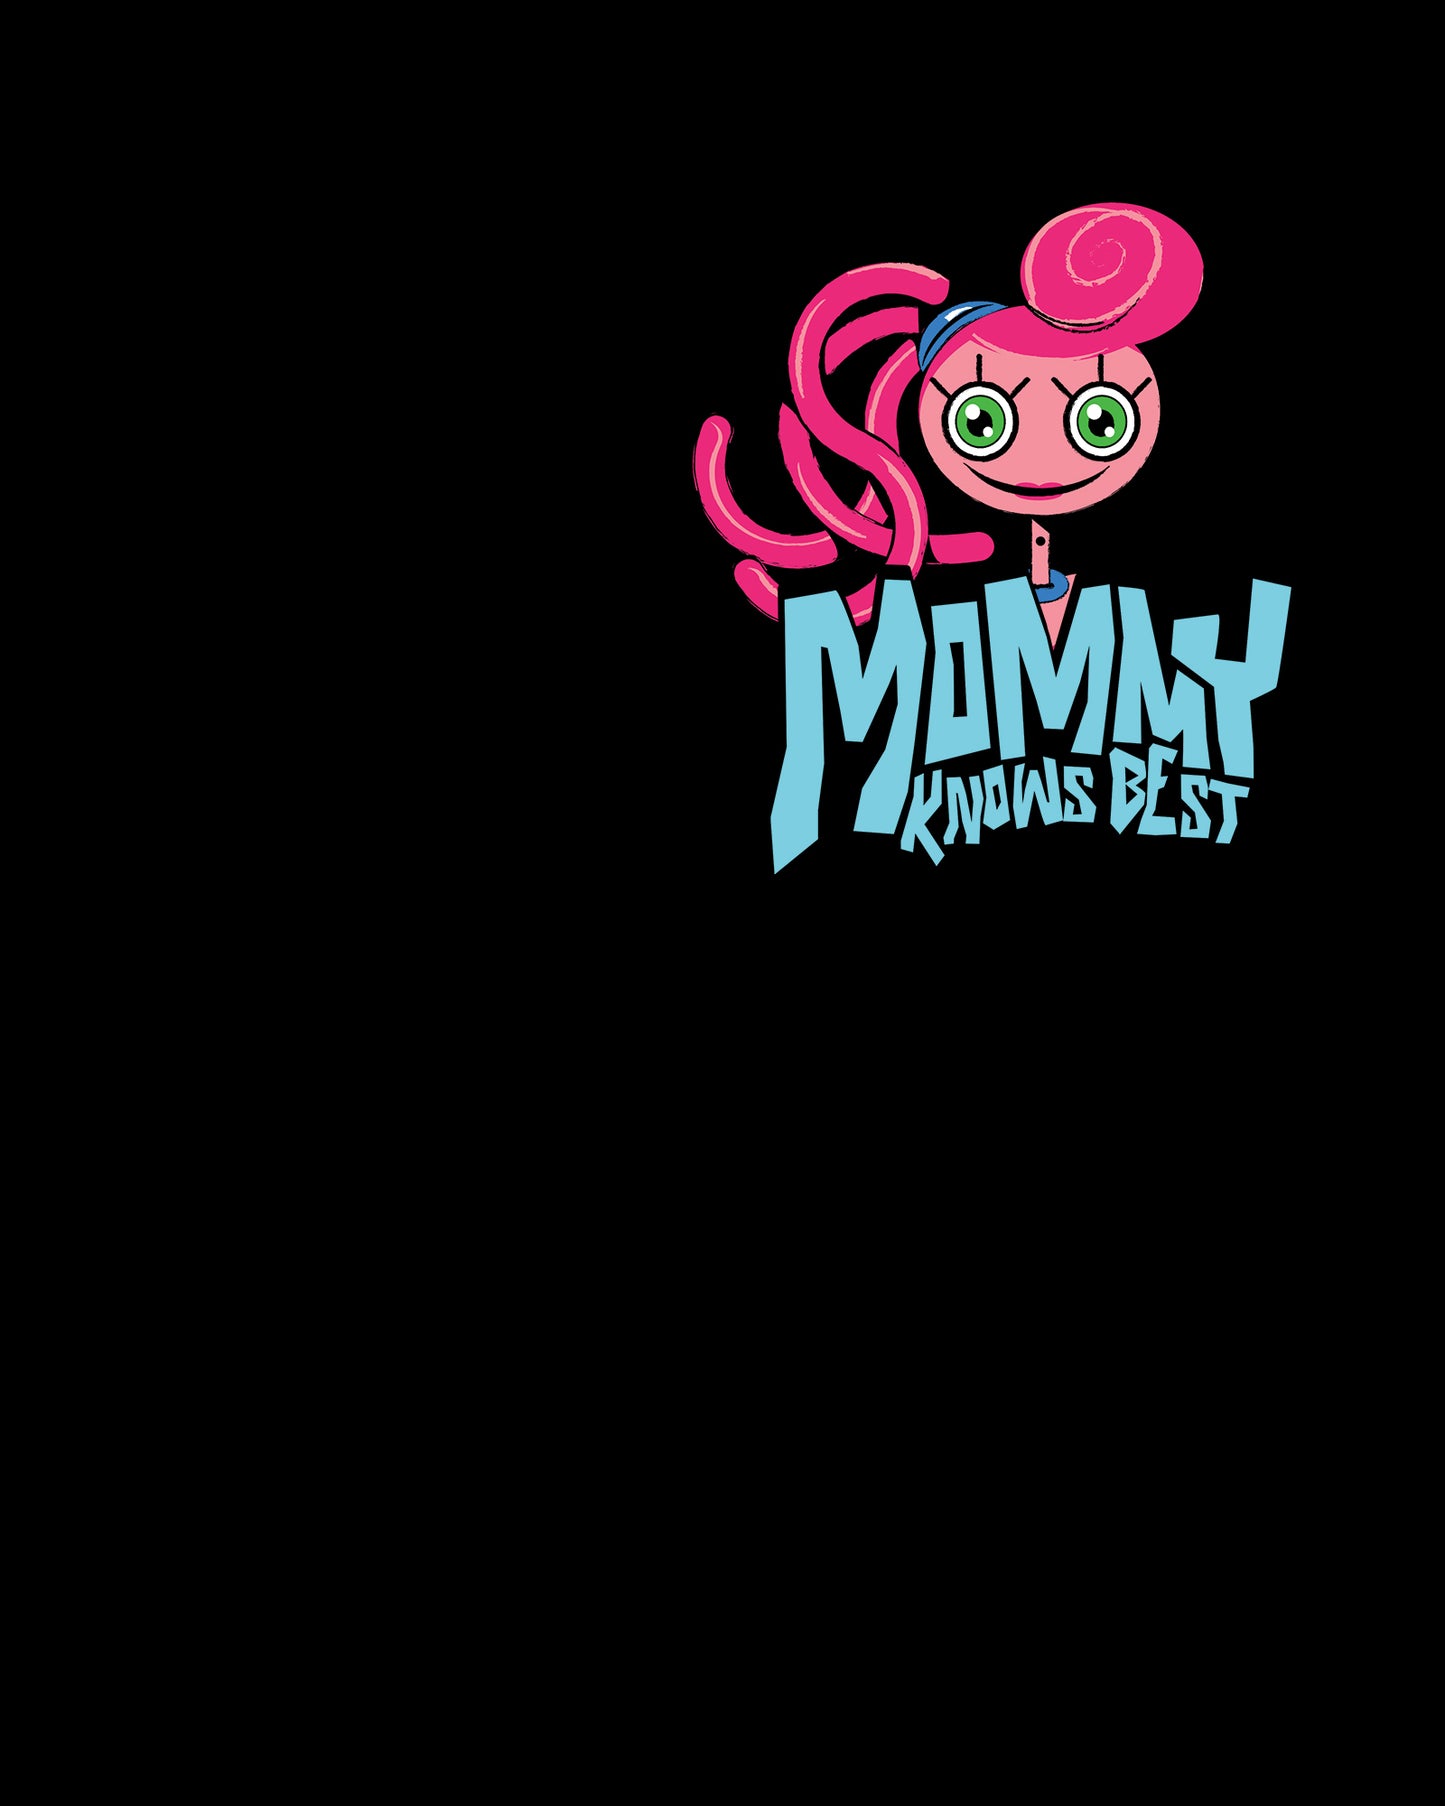 image on front of hoodie on pocket: mommy long legs smiling face. text: mommy knows best